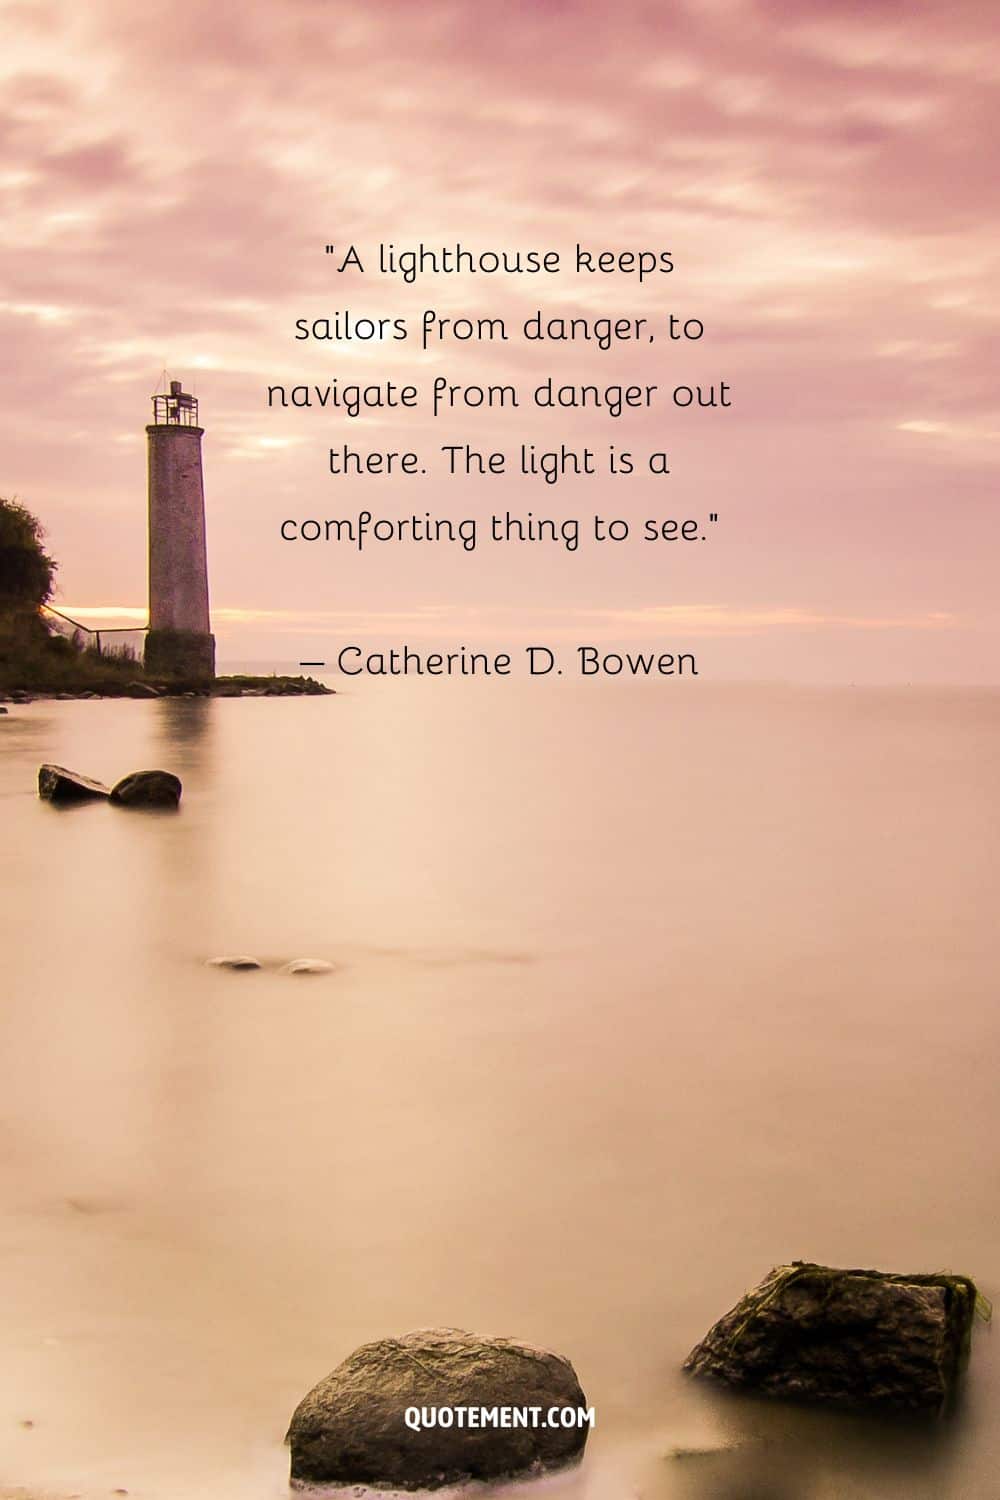 Mind-blowing quote by Catherine Drinker Bowen and a lighthouse in the background